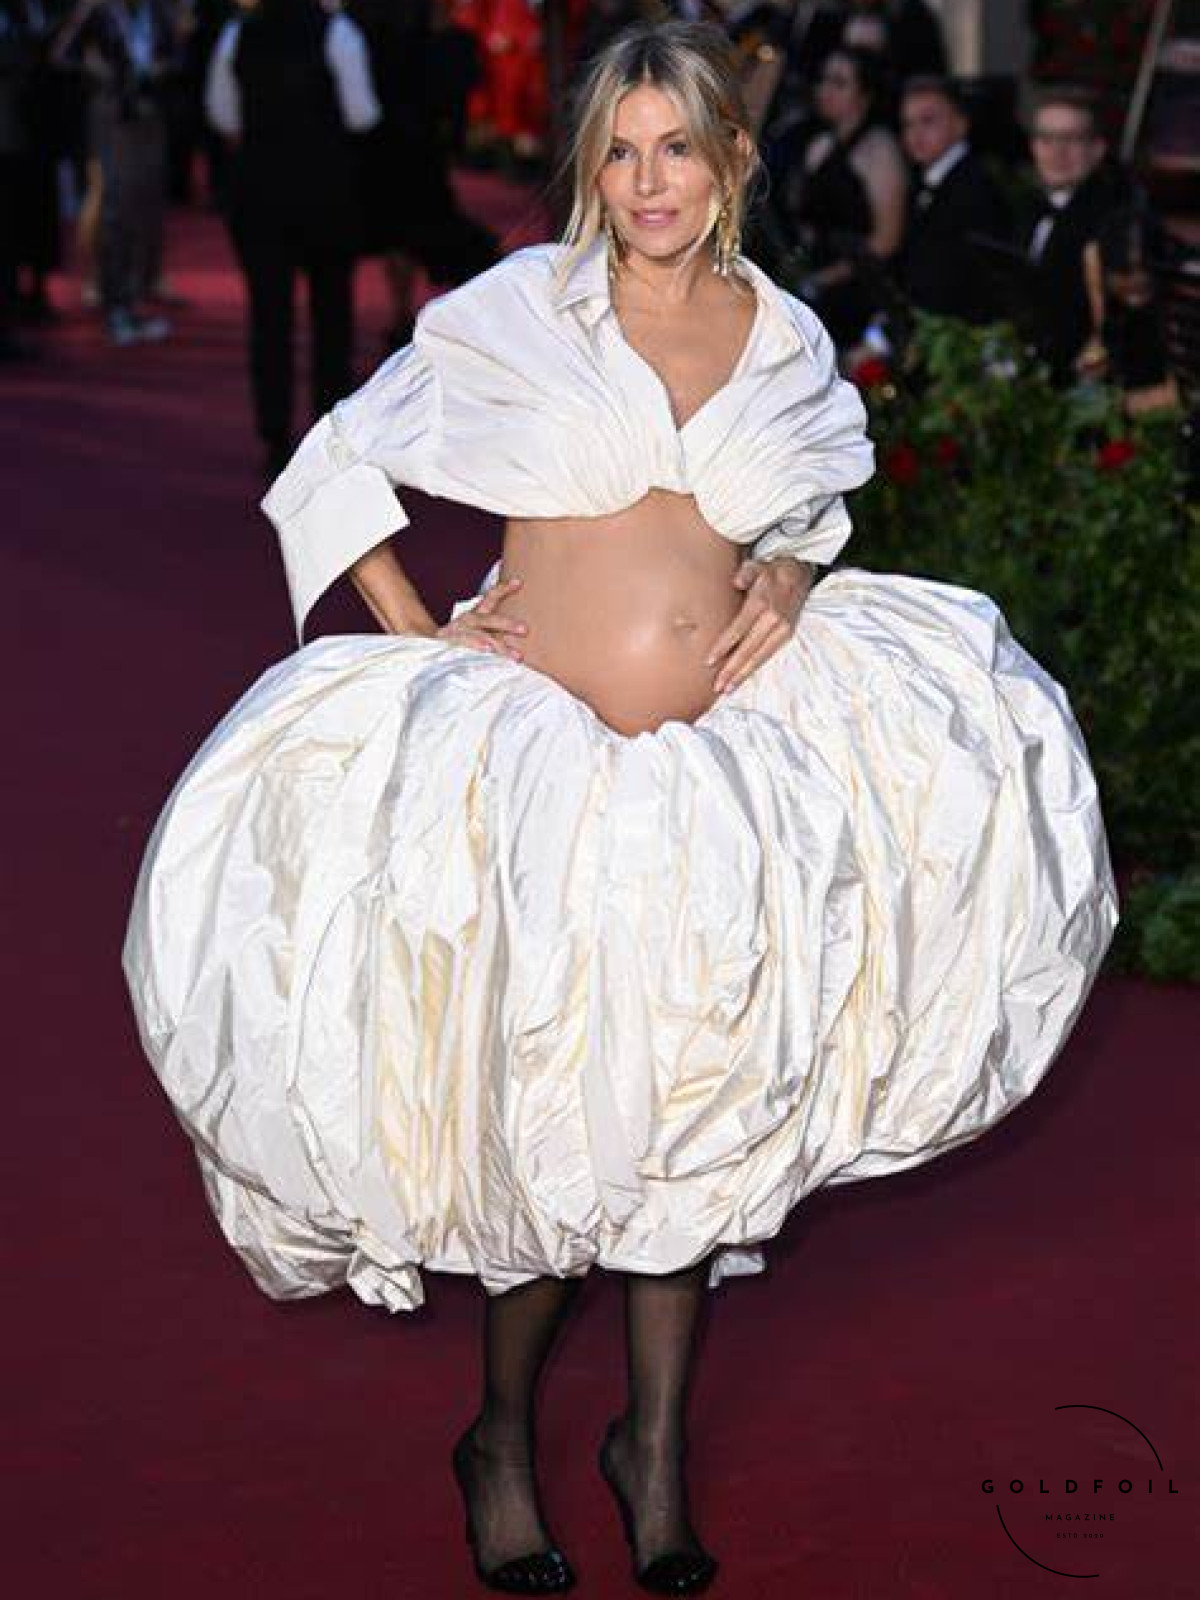 Sienna Miller for Vogue World in London, wearing a custom Schiaparelli two piece outfit, a balloon skirt and a top showing off a cute baby bump